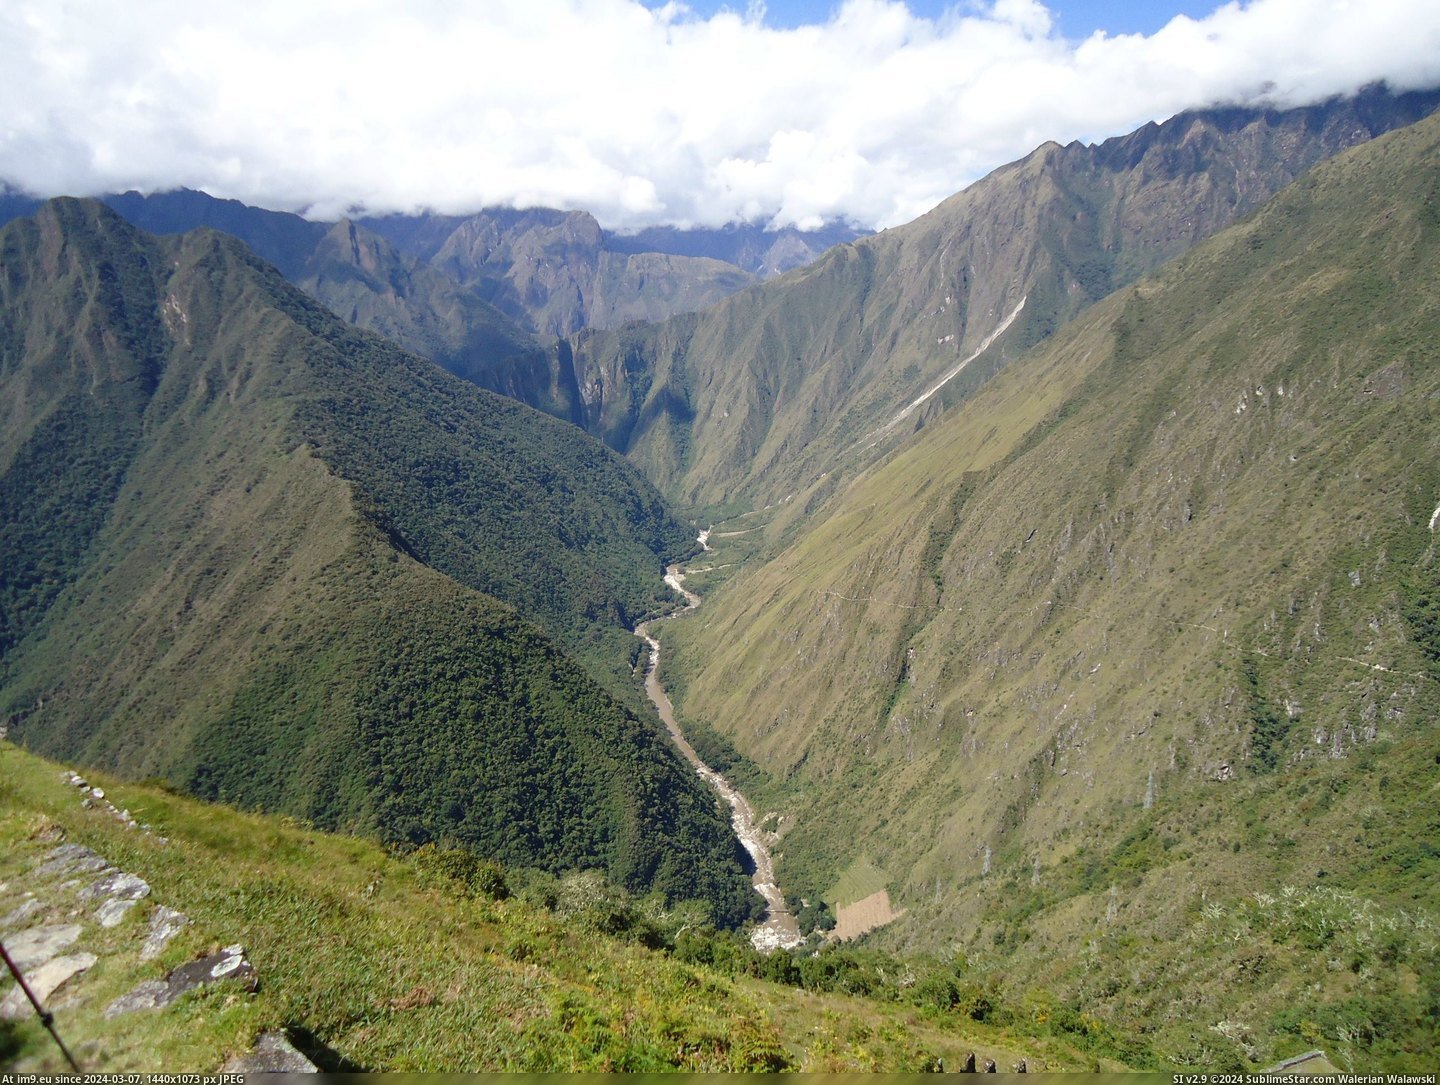 #Trail #Simply #2592x1944 #Picchu #Machu #Peru #Breathtaking #Hiked [Earthporn] I've also hiked the Inca Trail to Machu Picchu in Peru - the views are simply breathtaking [2592x1944] Pic. (Изображение из альбом My r/EARTHPORN favs))